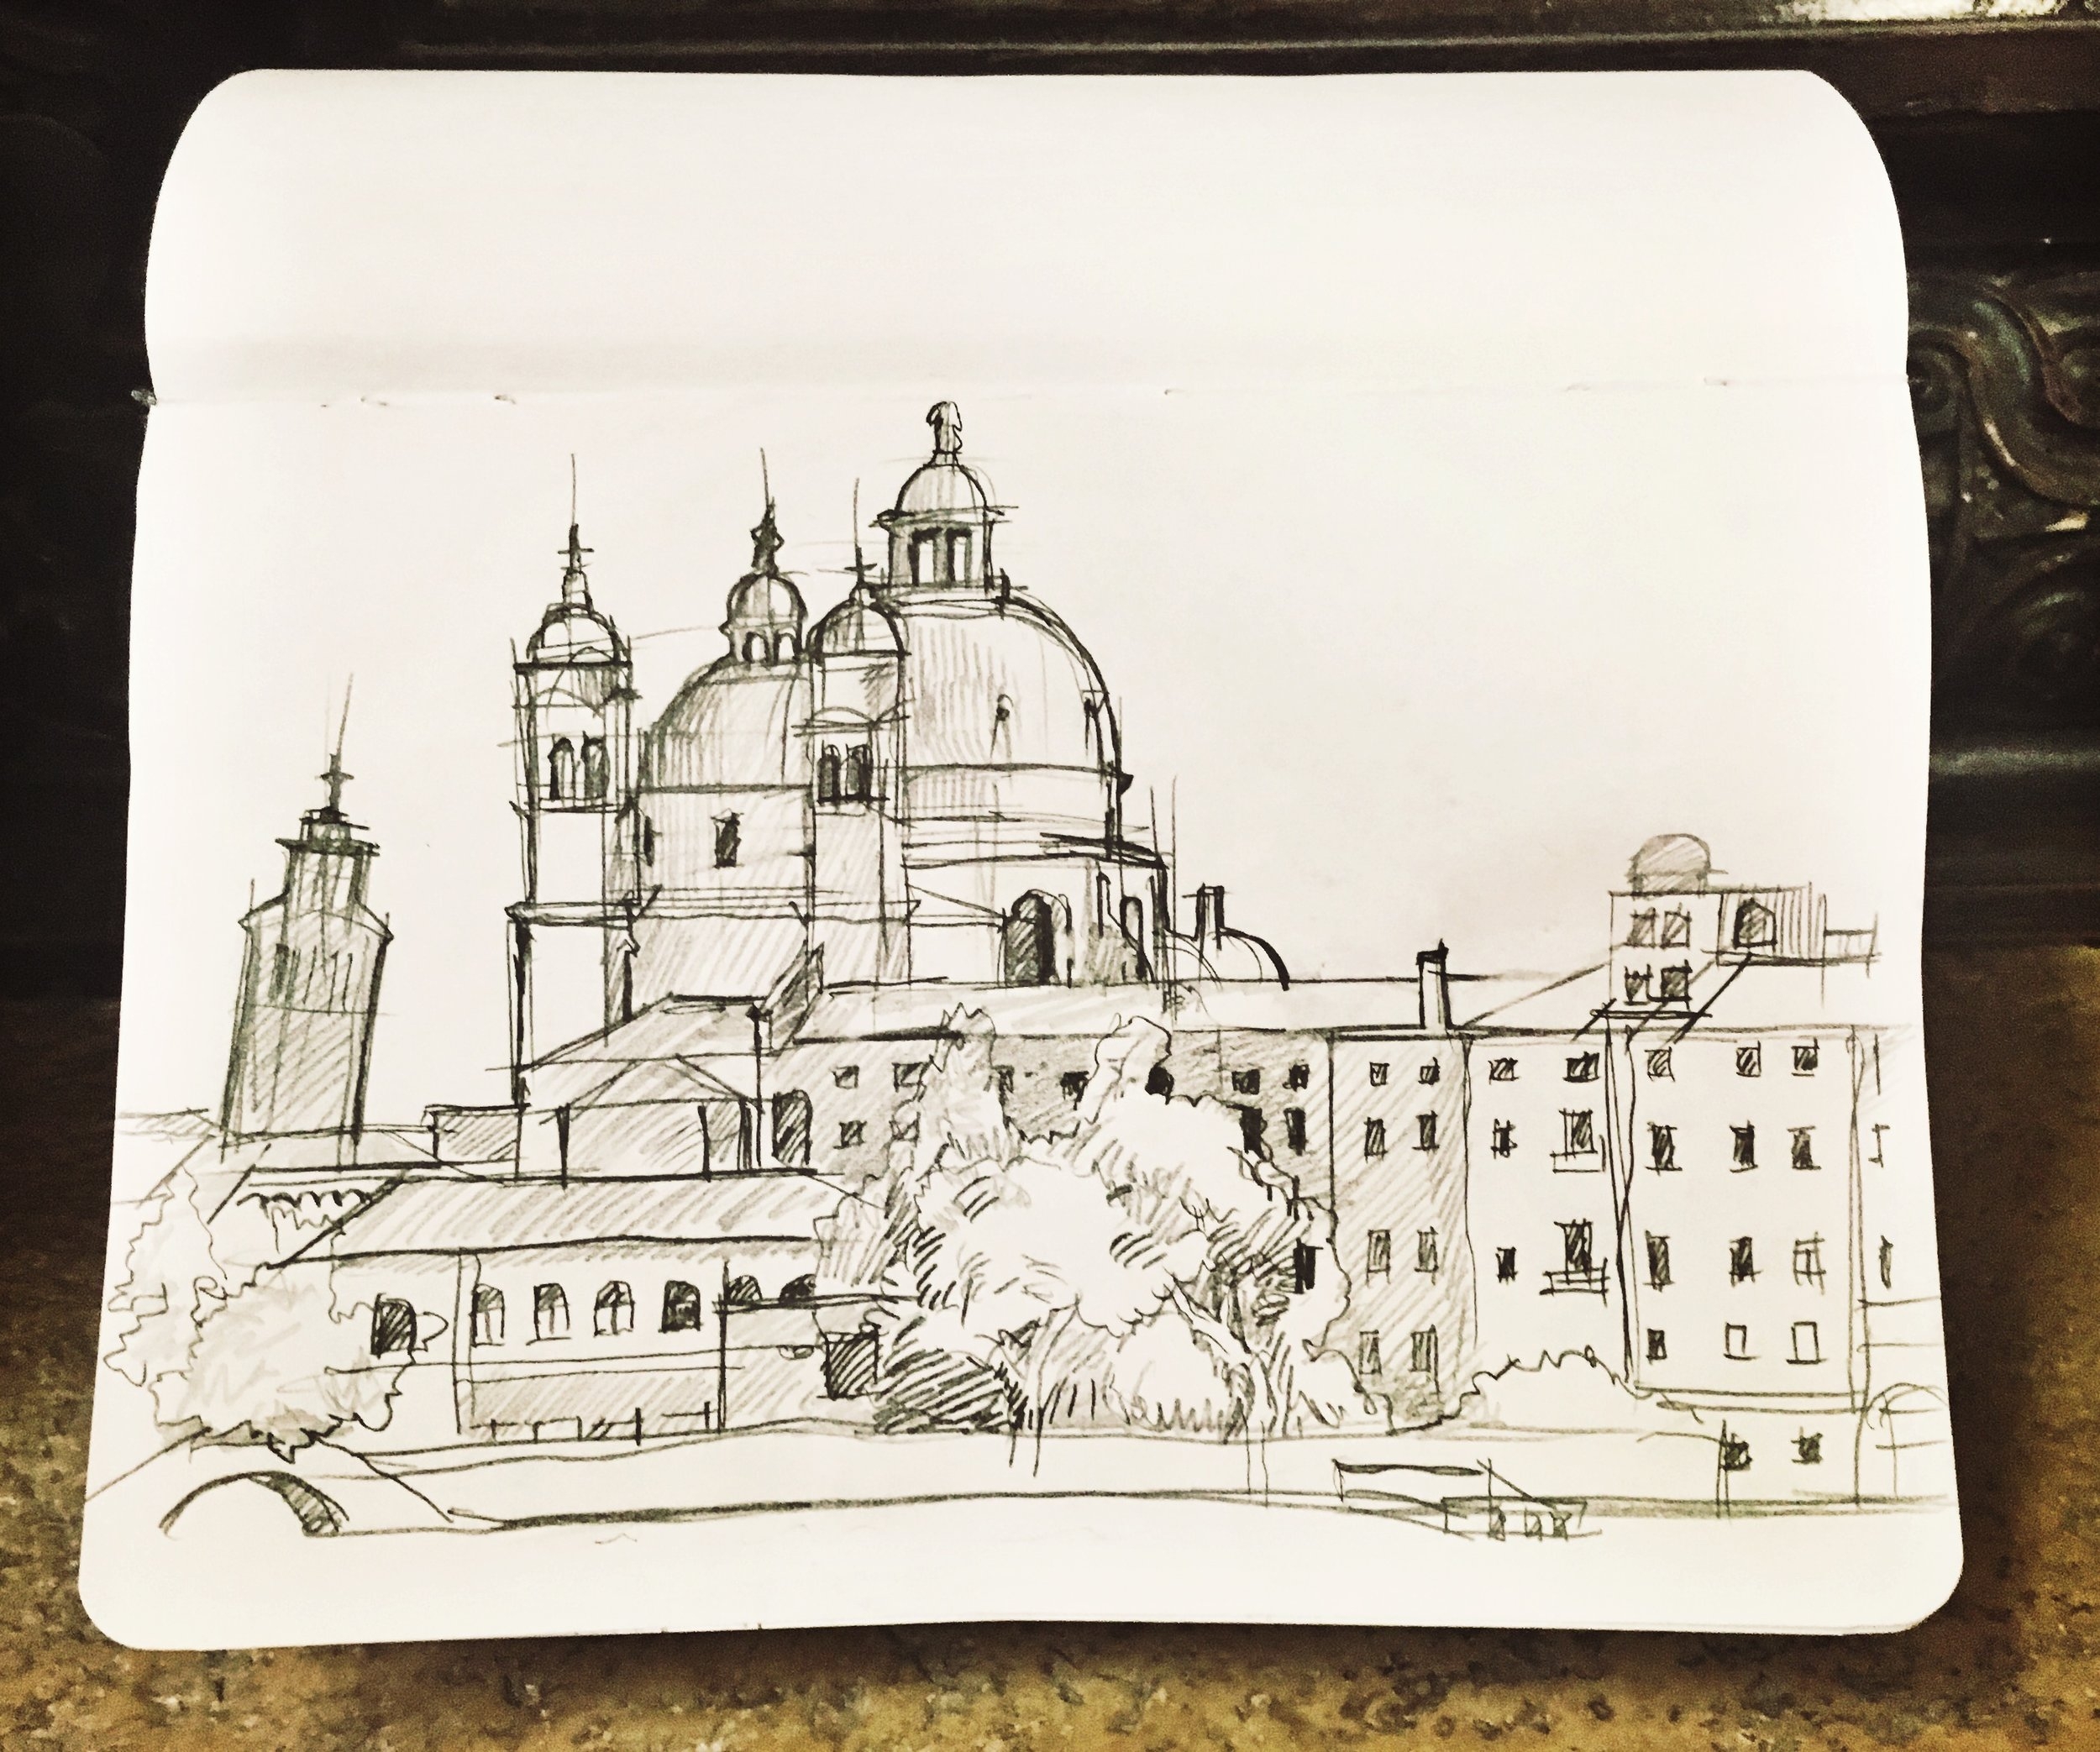 A casual sketch of the Church of Salute by Penghui Zhang, which we used for our annual exhibition's poster design!